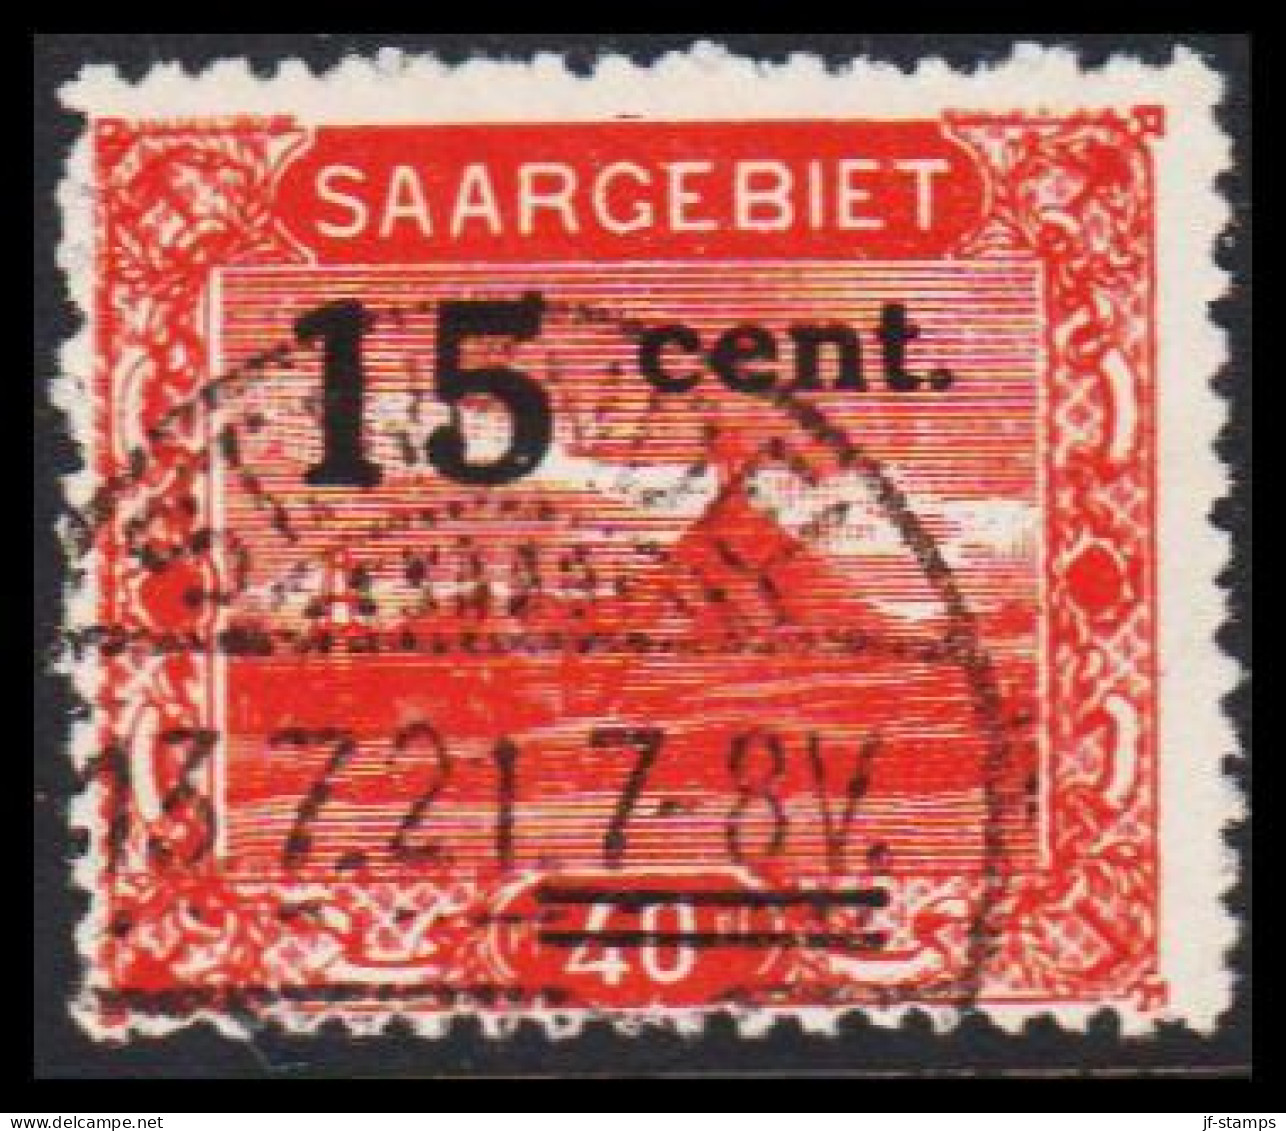 1921. SAARGEBIET. 15 Cent On 40 Pf Landscapes And Buildings - Luxus Cancelled ST WINDEL 13.7.... (MICHEL 73A) - JF539376 - Gebraucht